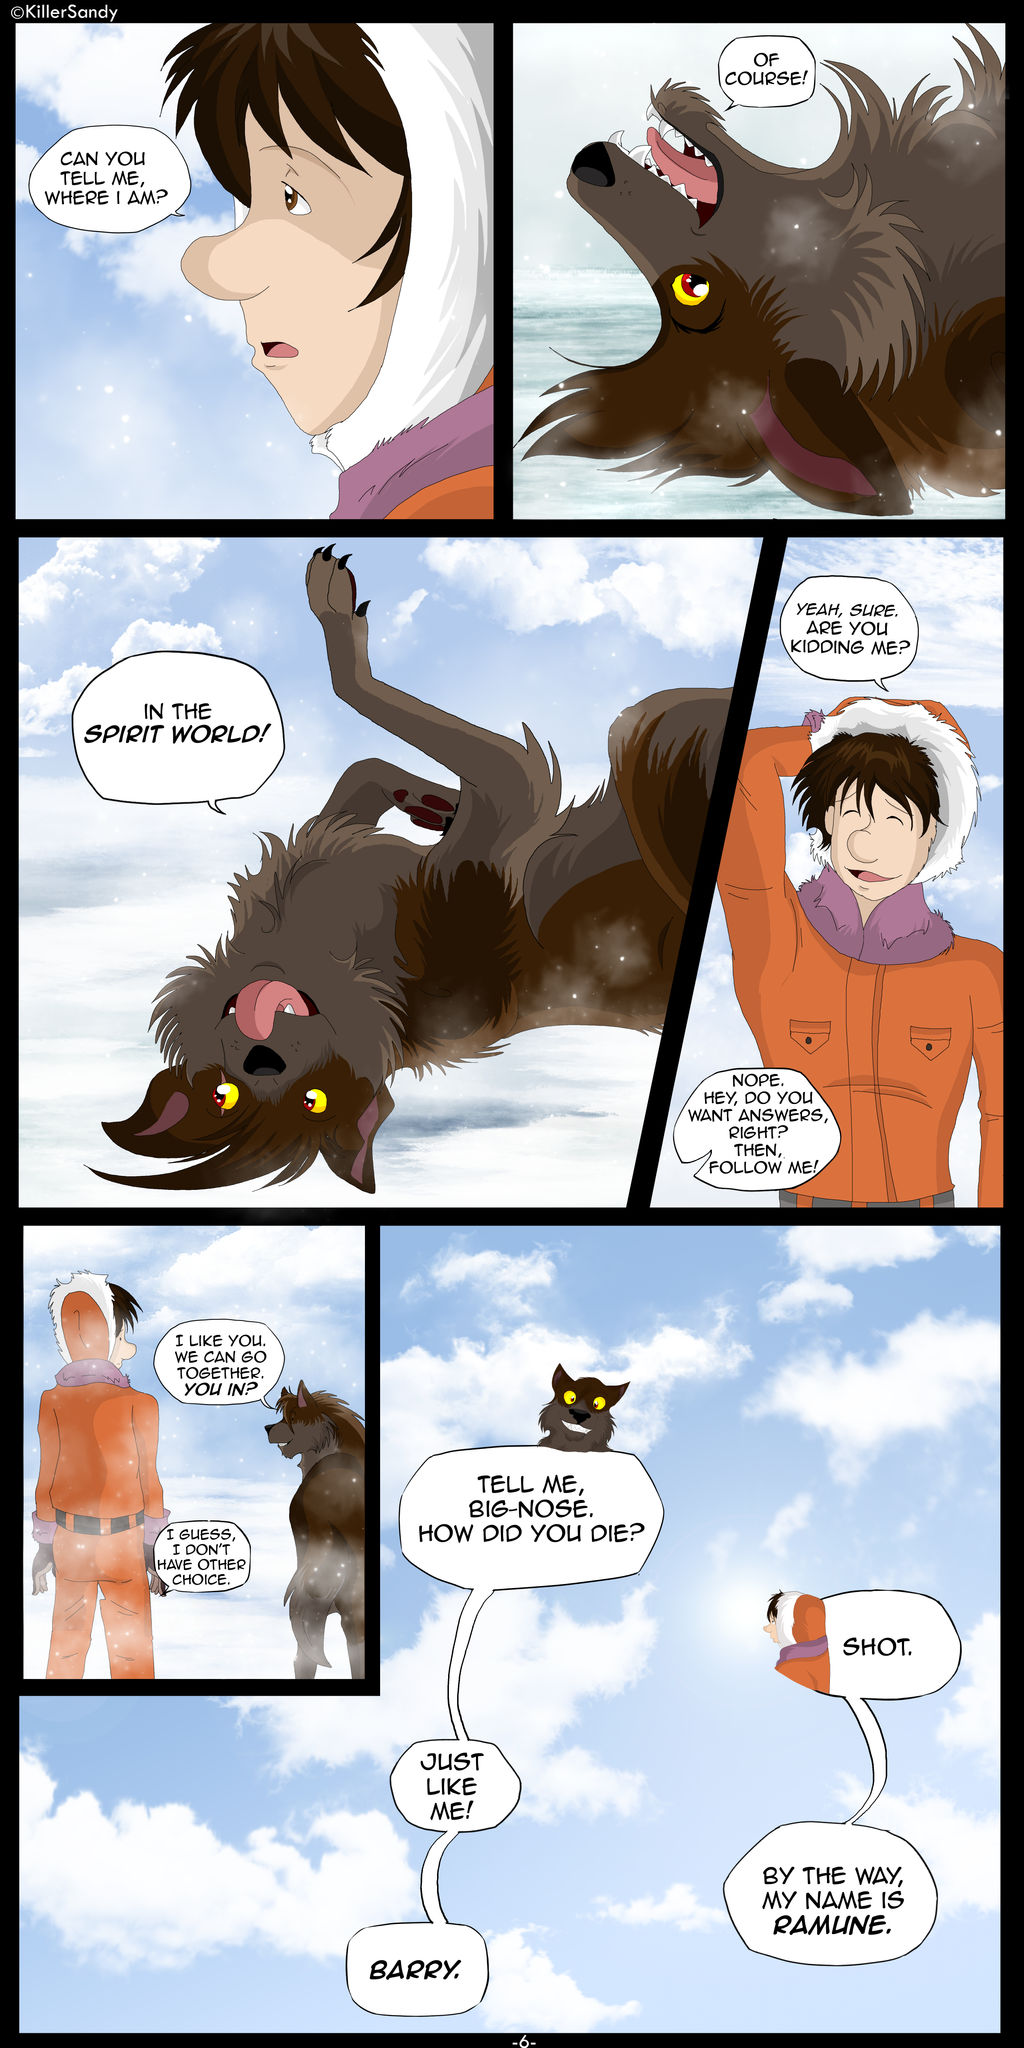 The Prince of the Moonlight Stone page 6